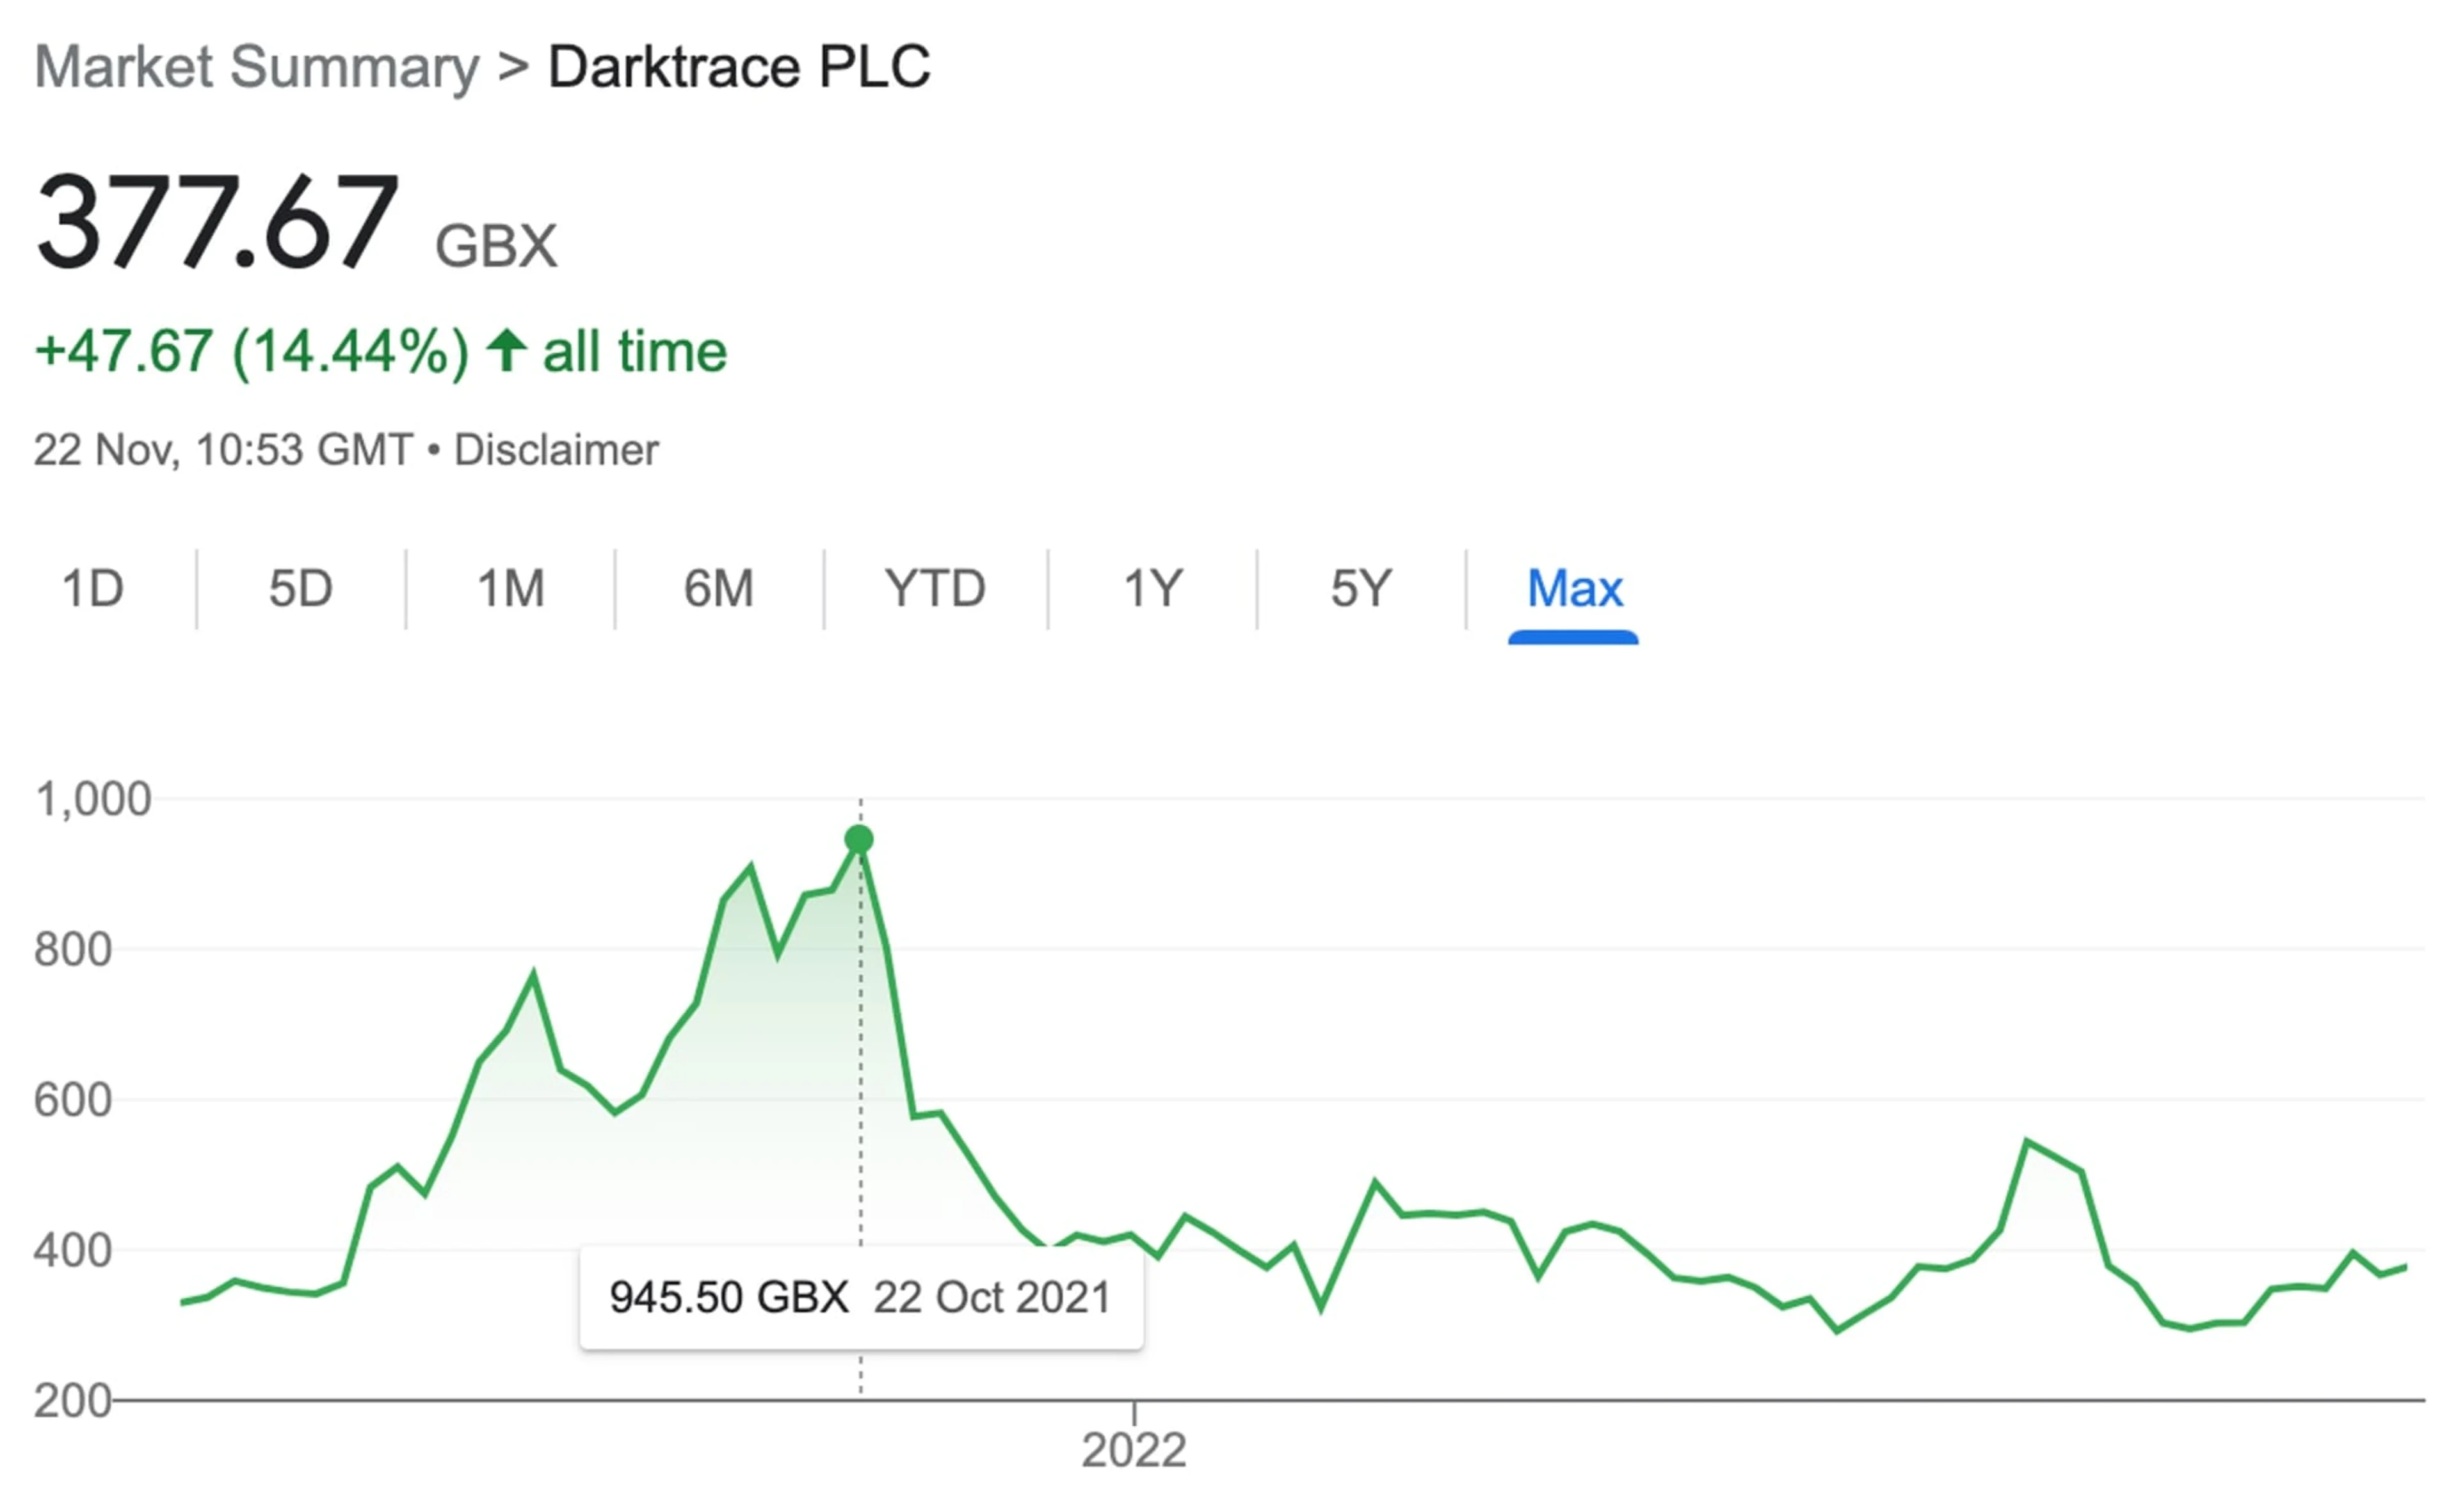 The share price chart of Darktrace PLC. It peaked at 945.50 GBX on 22 October 2021, then began to fall.